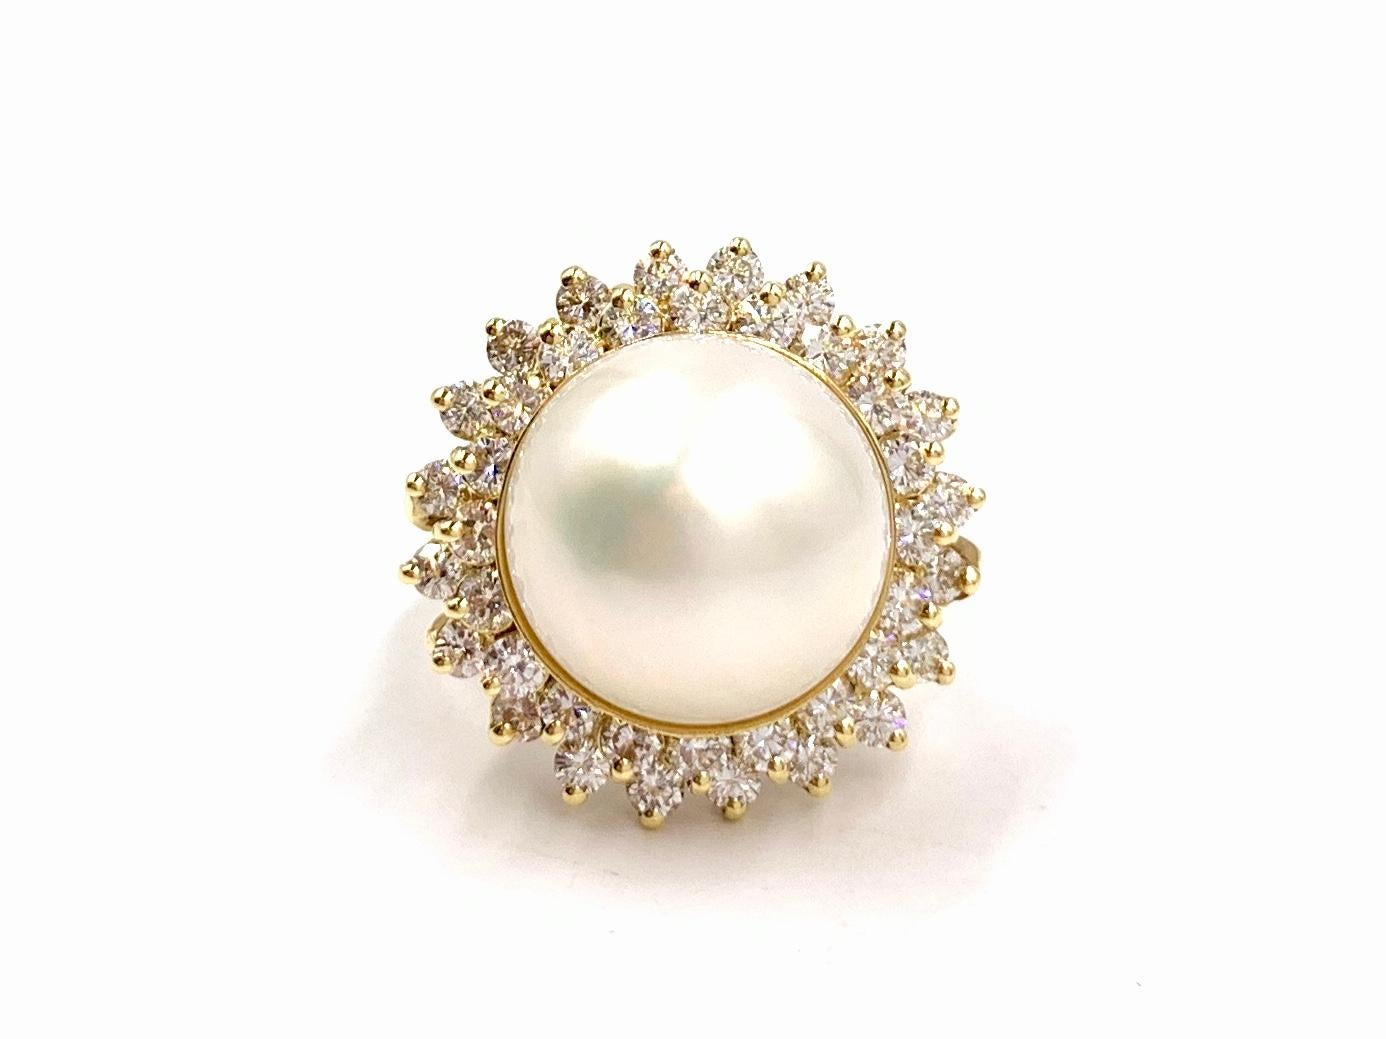 A timeless 18 karat yellow gold cocktail ring featuring a lustrous and smooth 14mm mabe pearl surrounded by 40 diamonds at 1.60 carats total weight. Diamond quality is approximately F-G color, VS2 clarity. The surface of the ivory pearl is free of